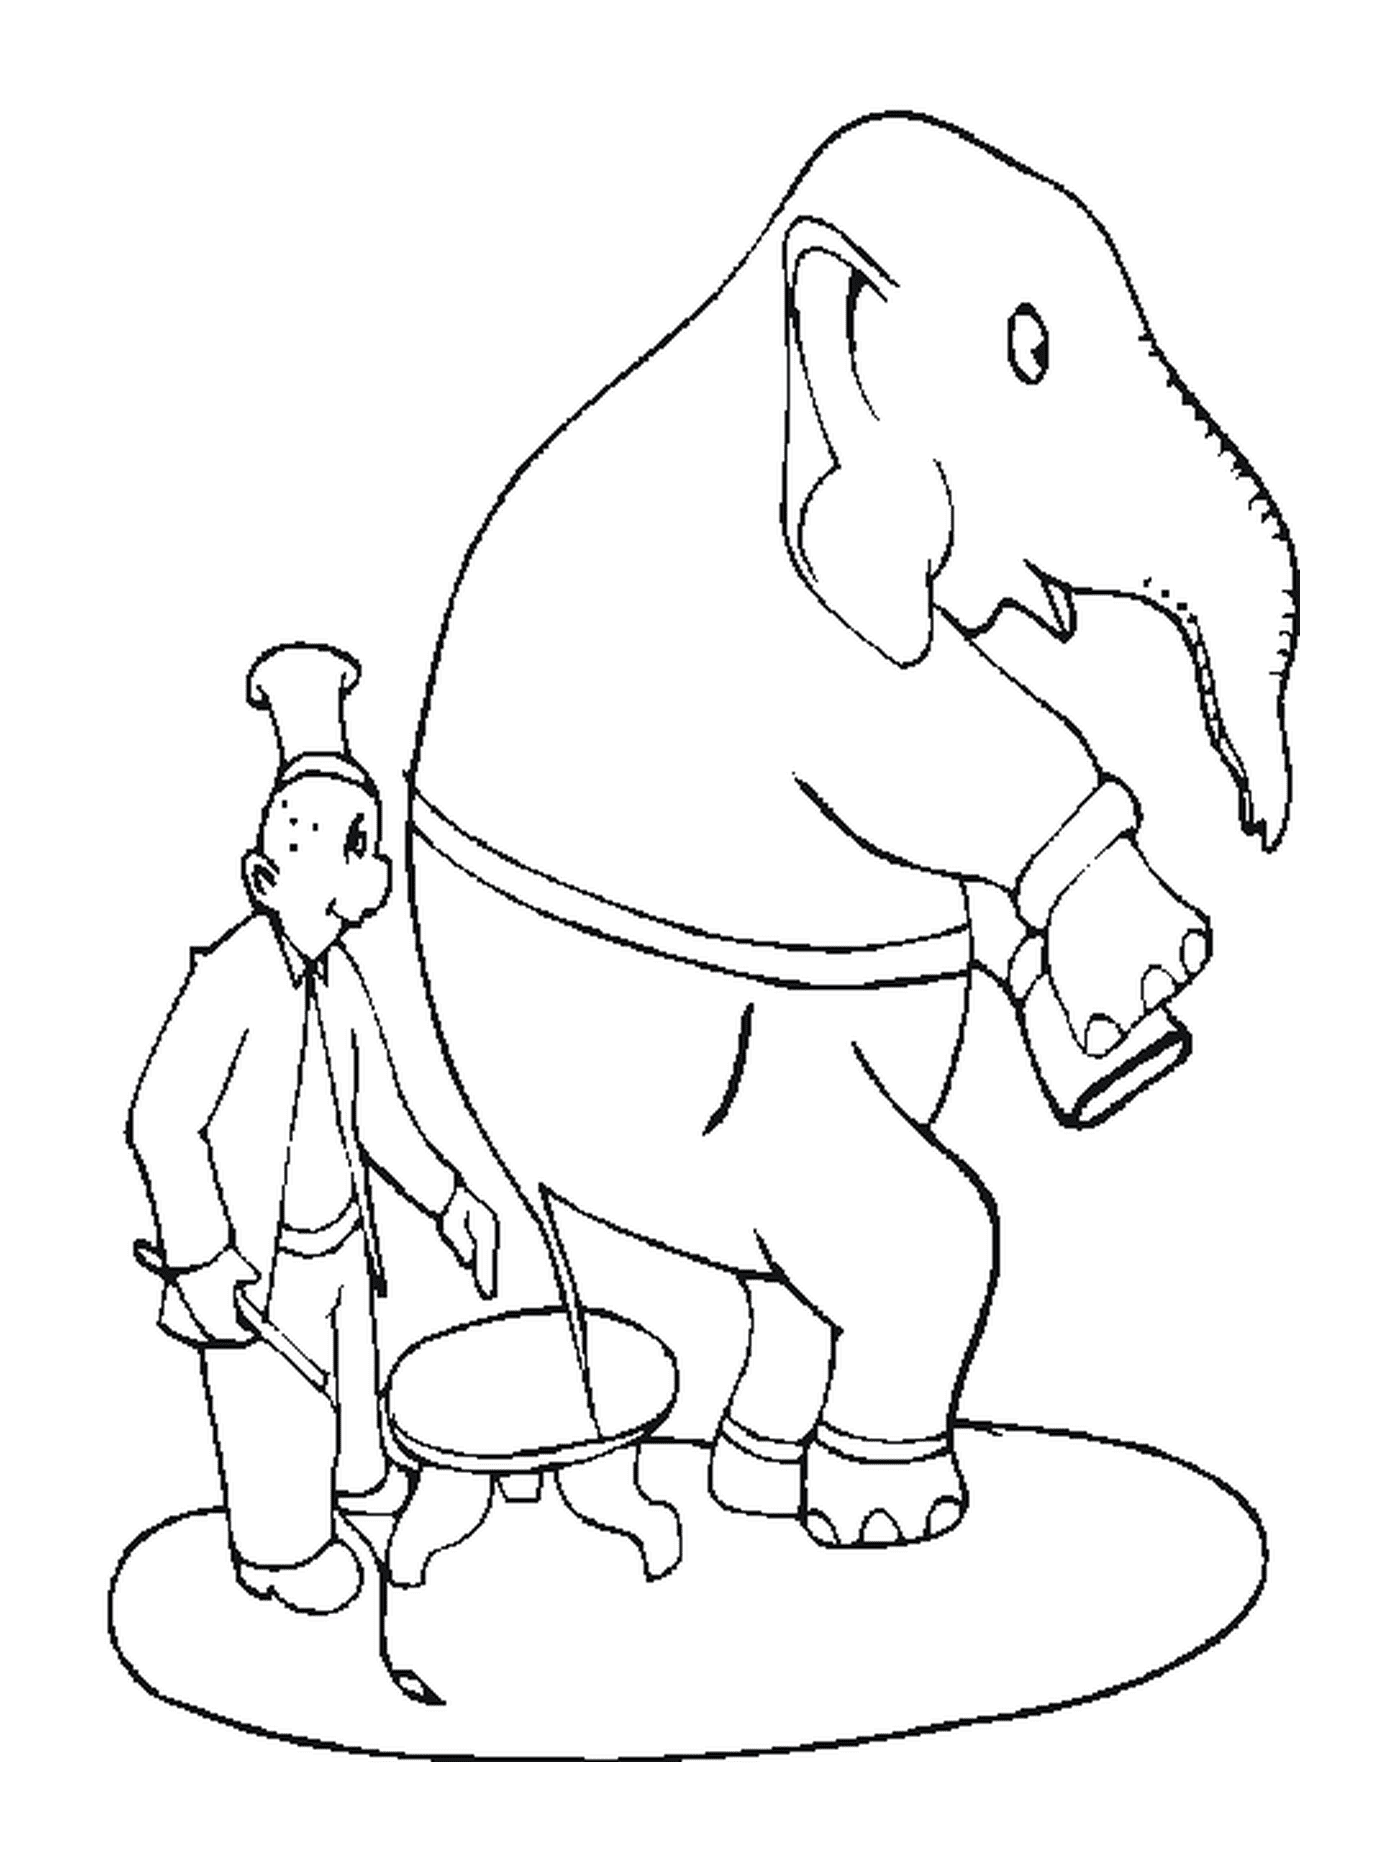  An elephant trainer for the circus 